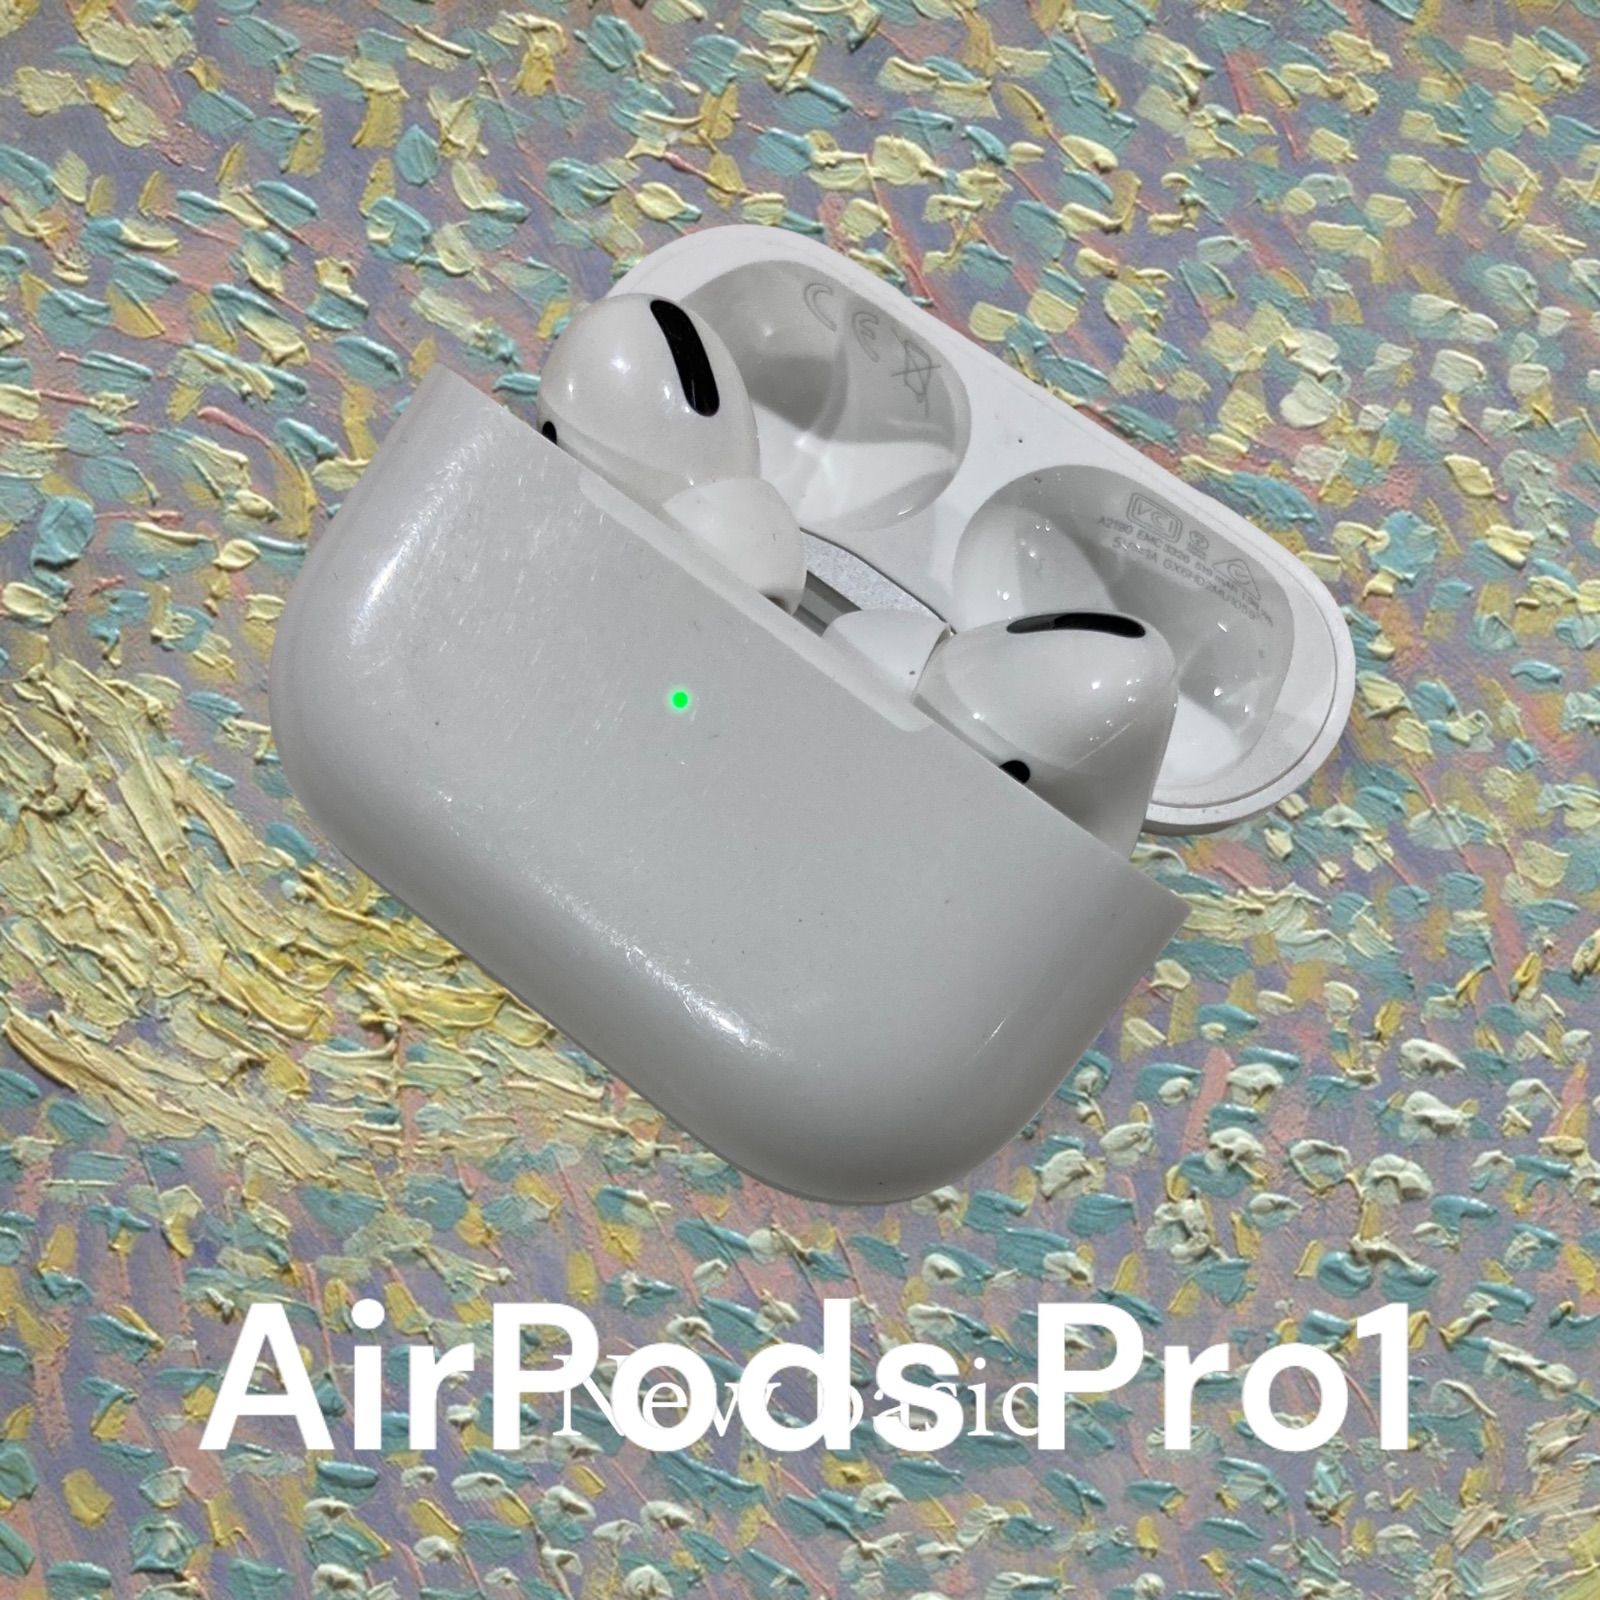 AirPods Pro1エアポッズ プロ1○白ホワイト used 動作確認済み キズ ...